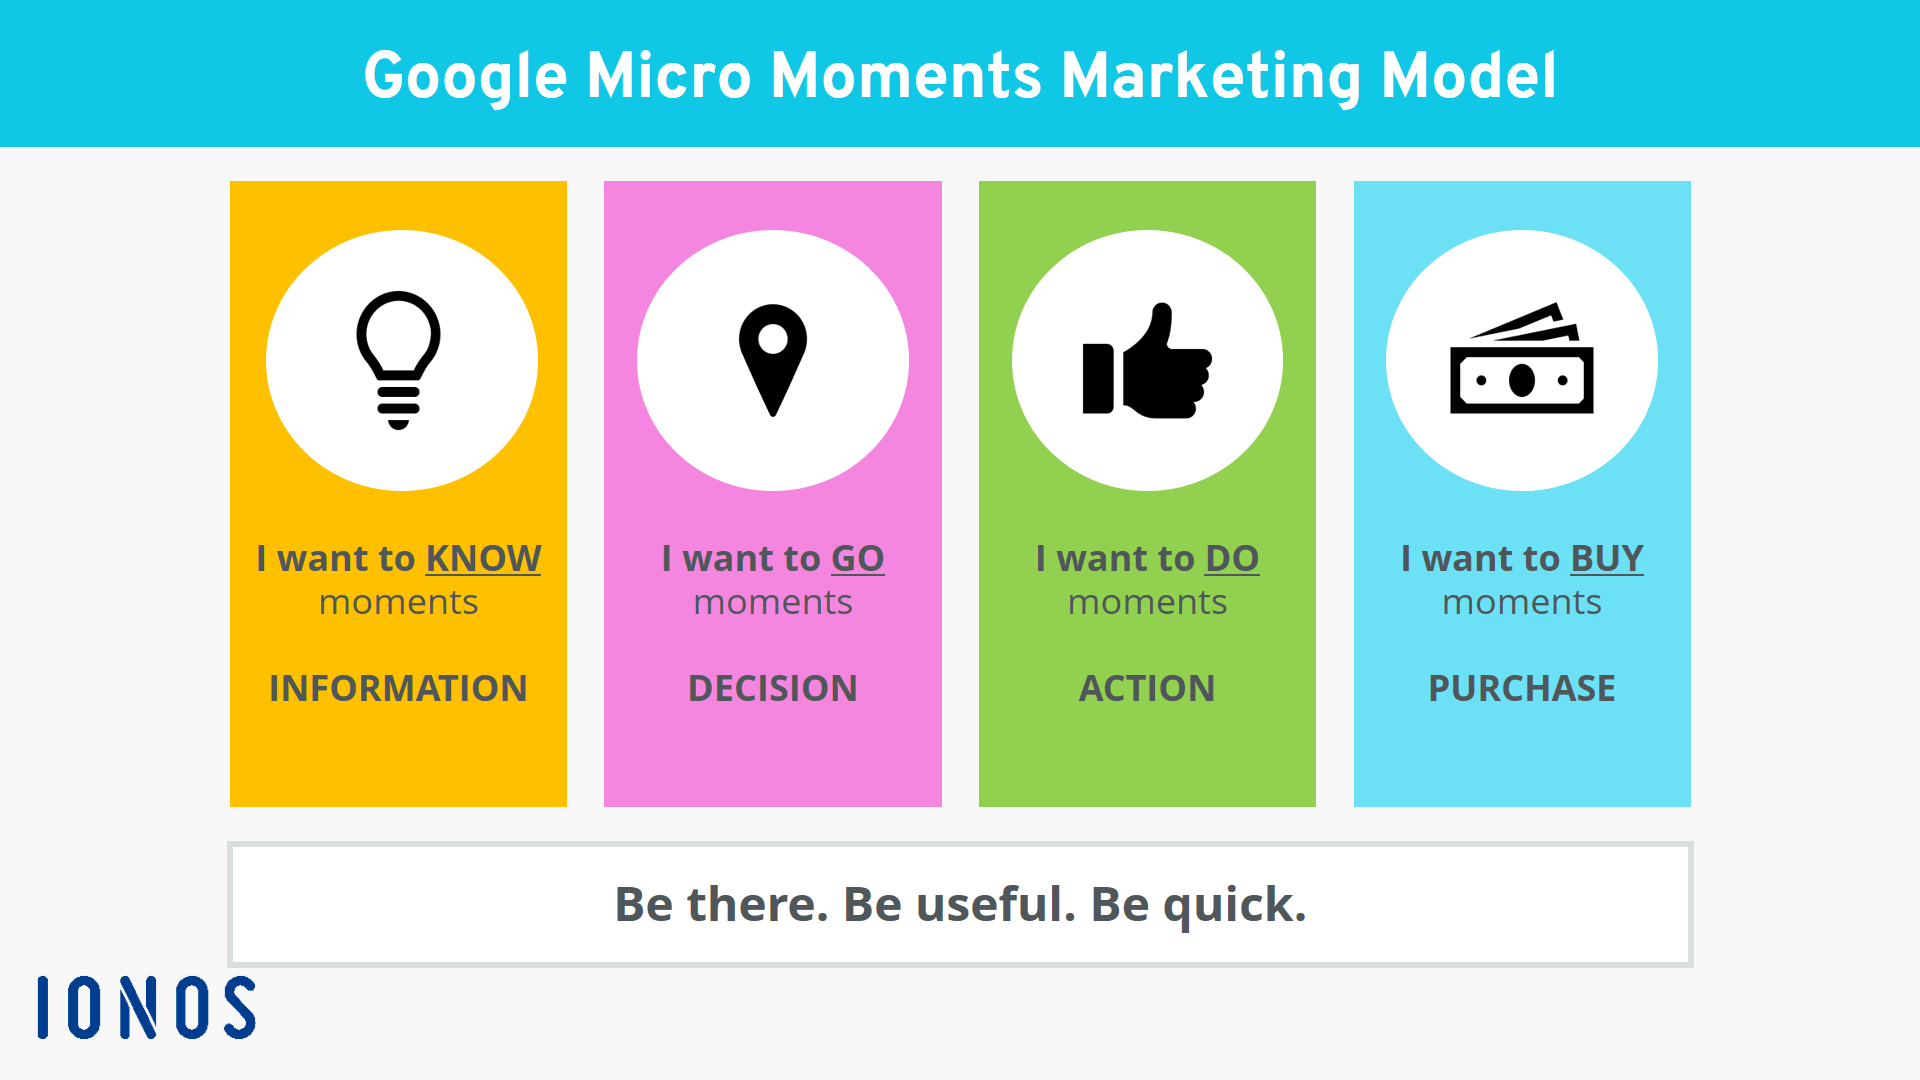 The four key micro-moments according to Google